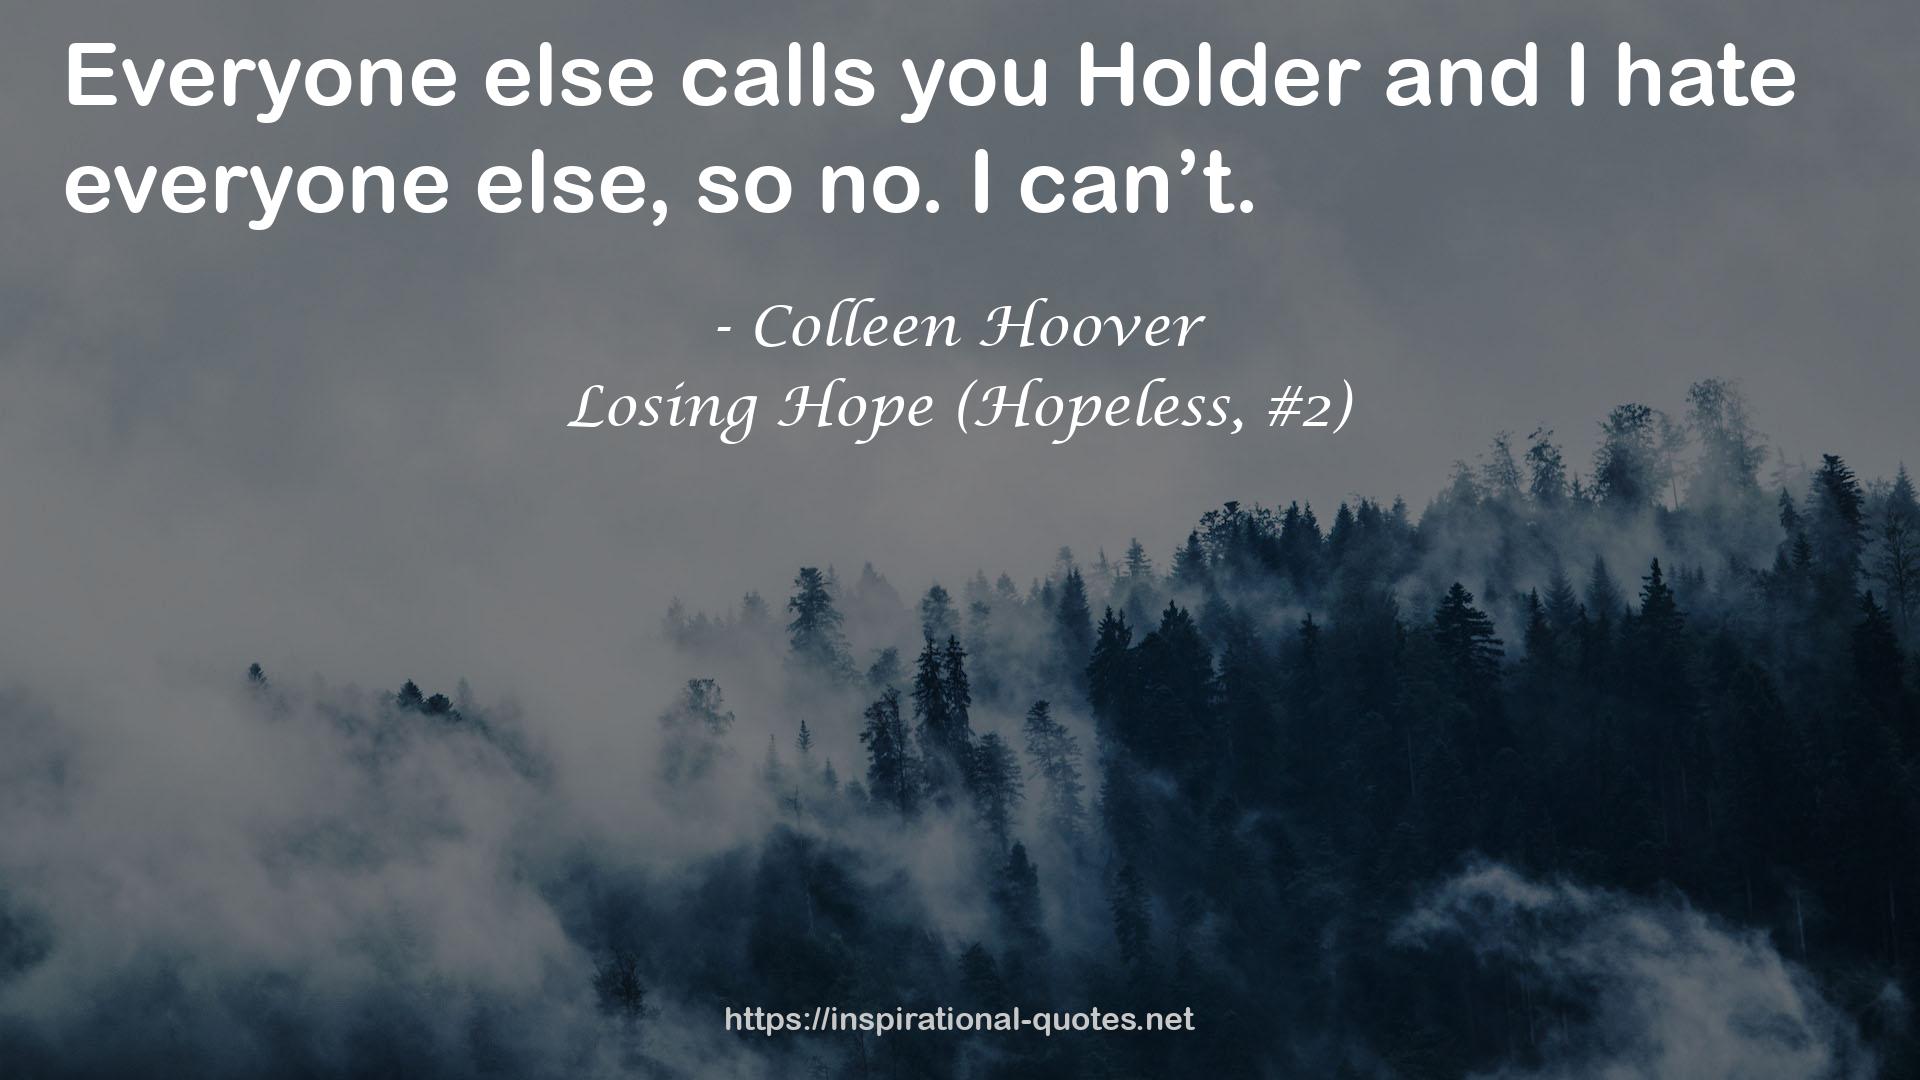 Losing Hope (Hopeless, #2) QUOTES